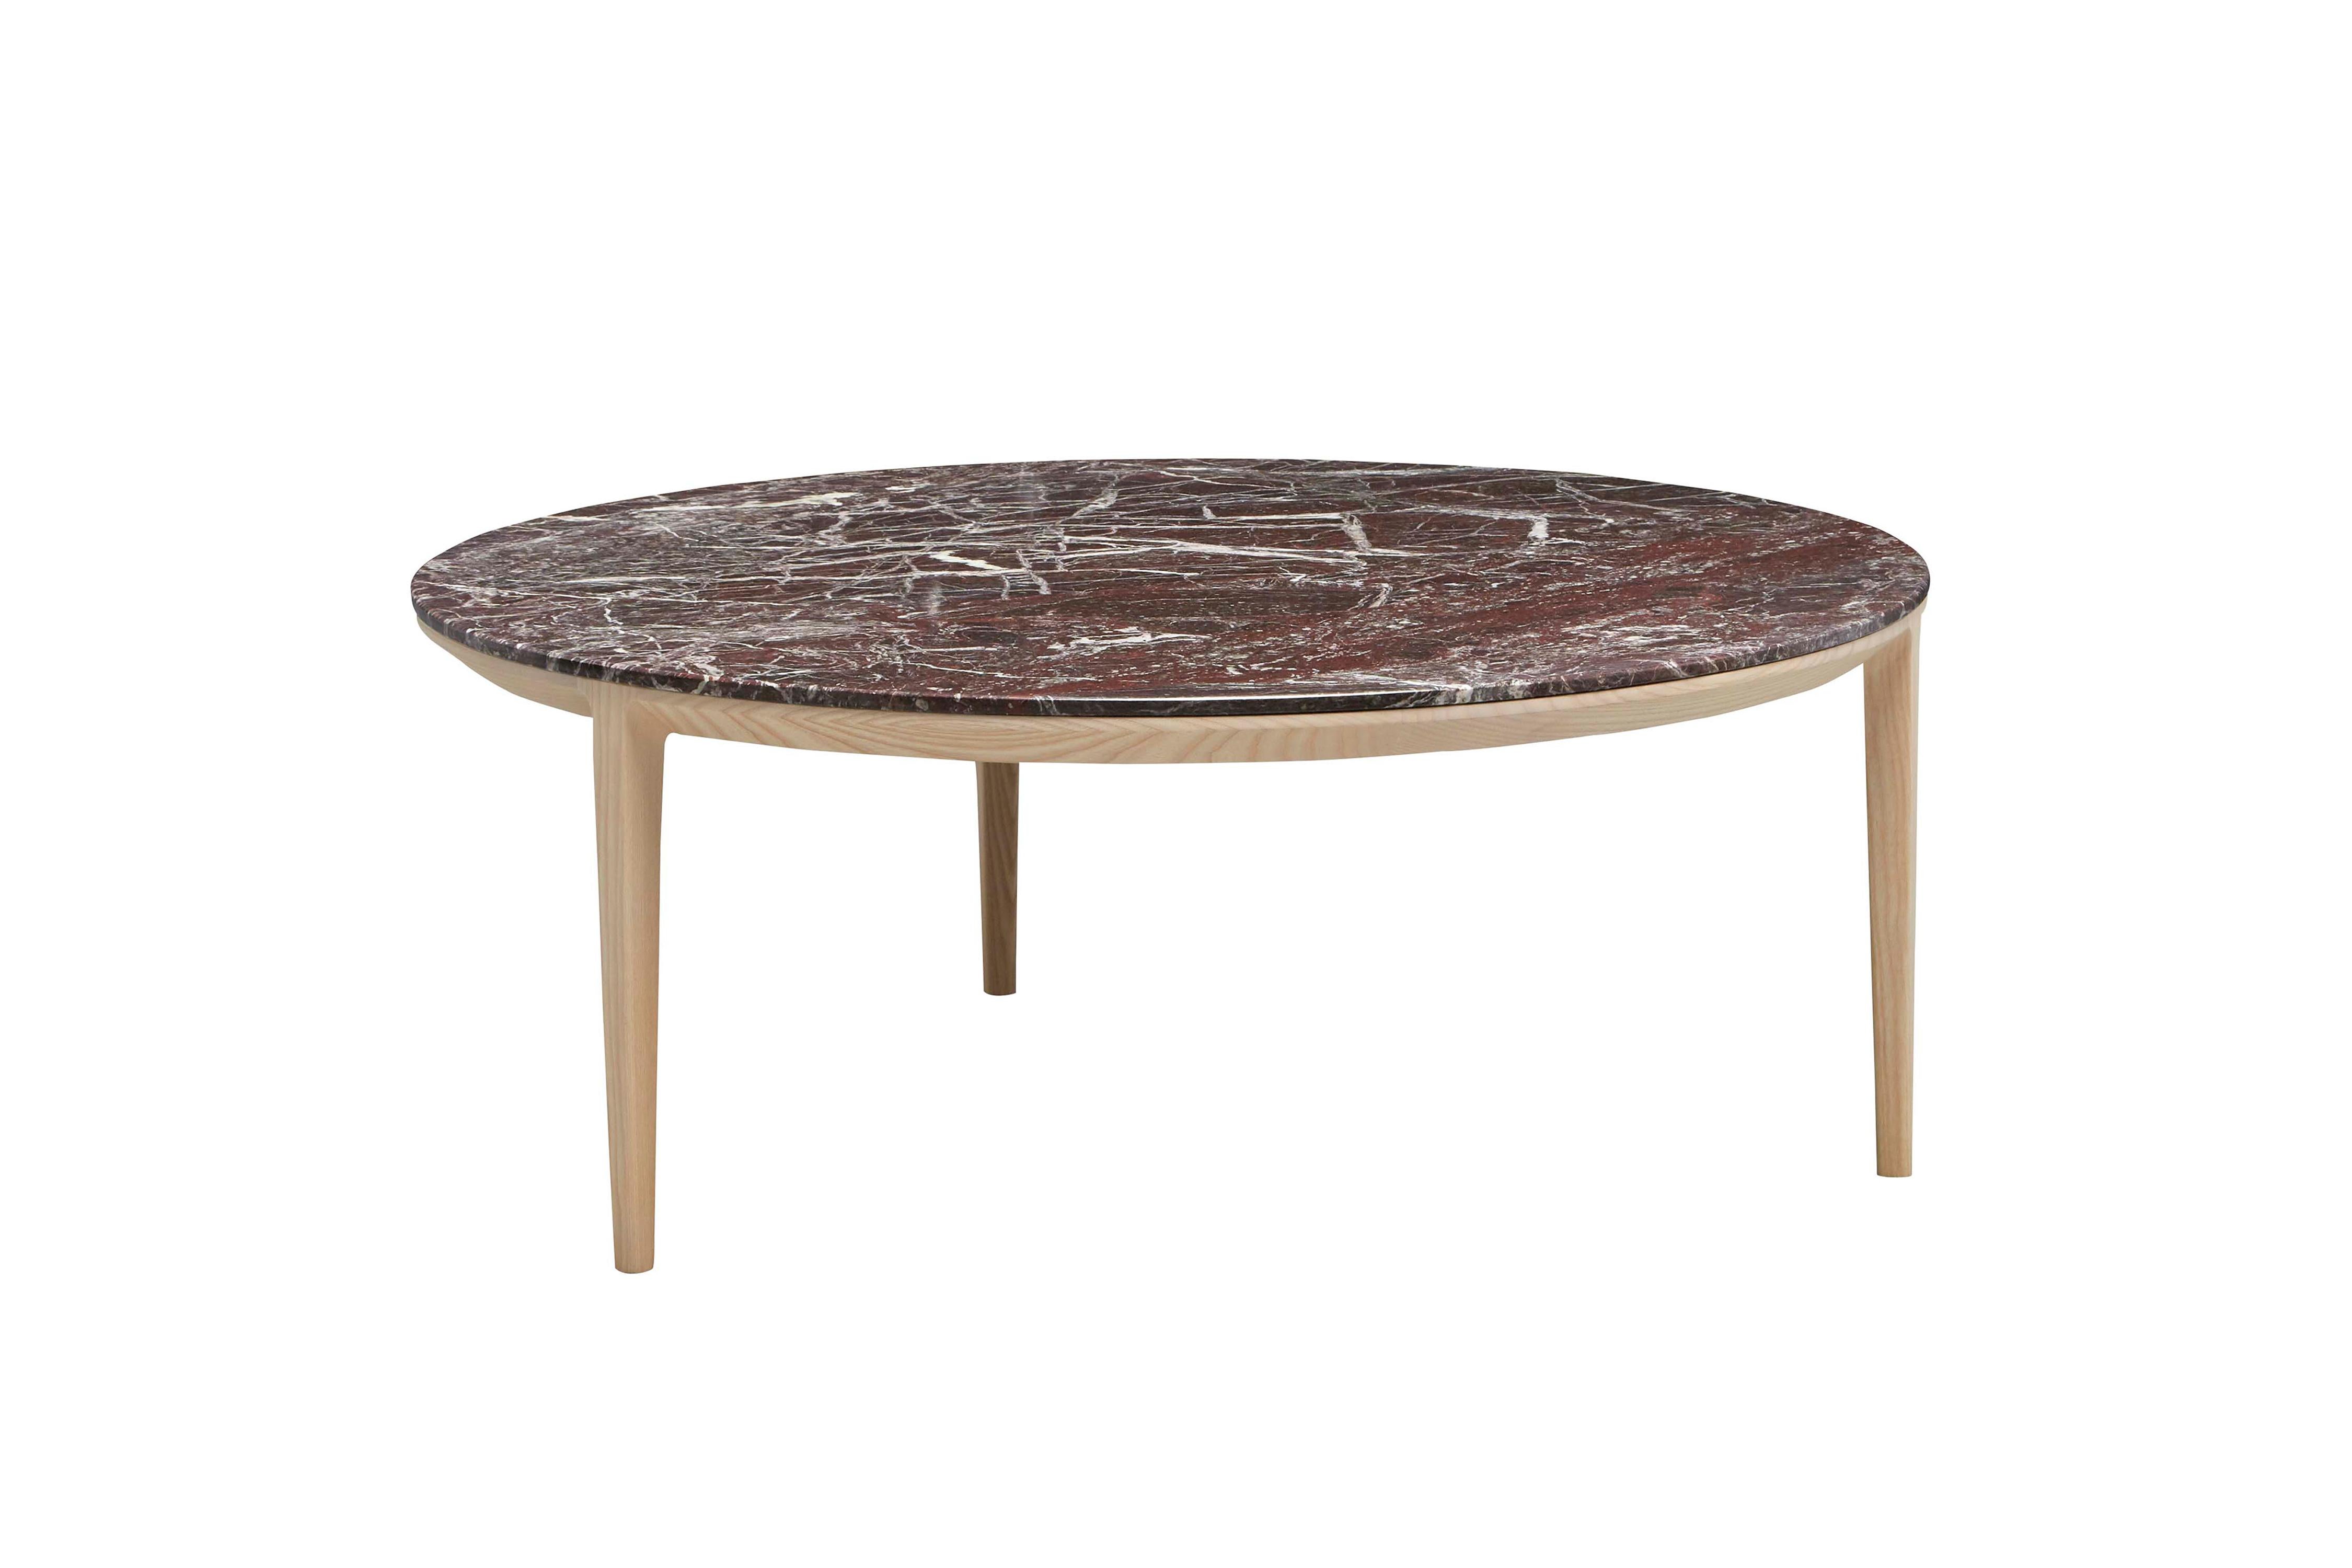 Minimalist SP01 Etoile Coffee Table in Green Verde Guatemala Marble, Made in Italy For Sale